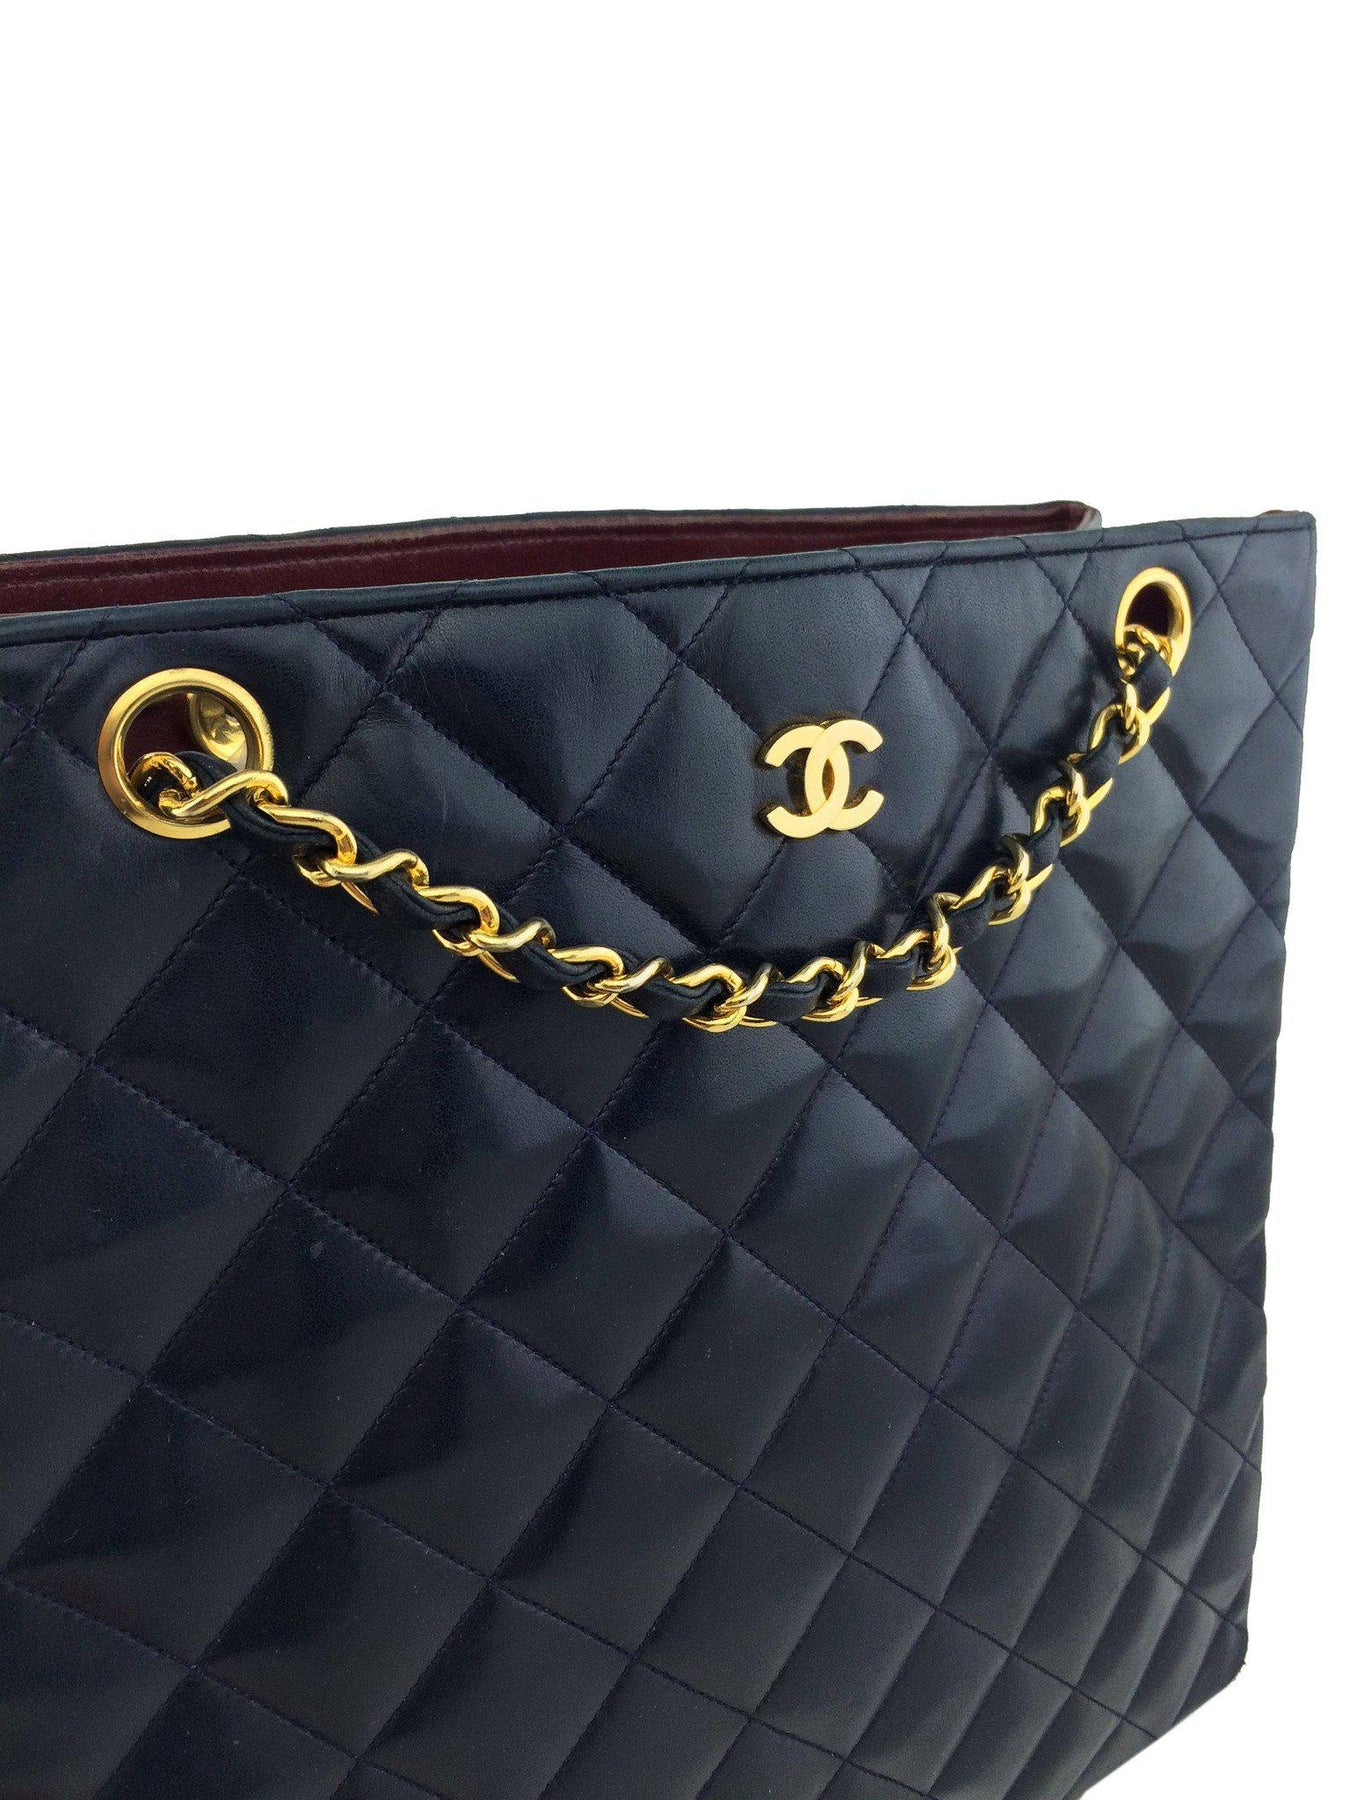 Chanel Vintage Quilted Lambskin Medium Shopper Tote Bag